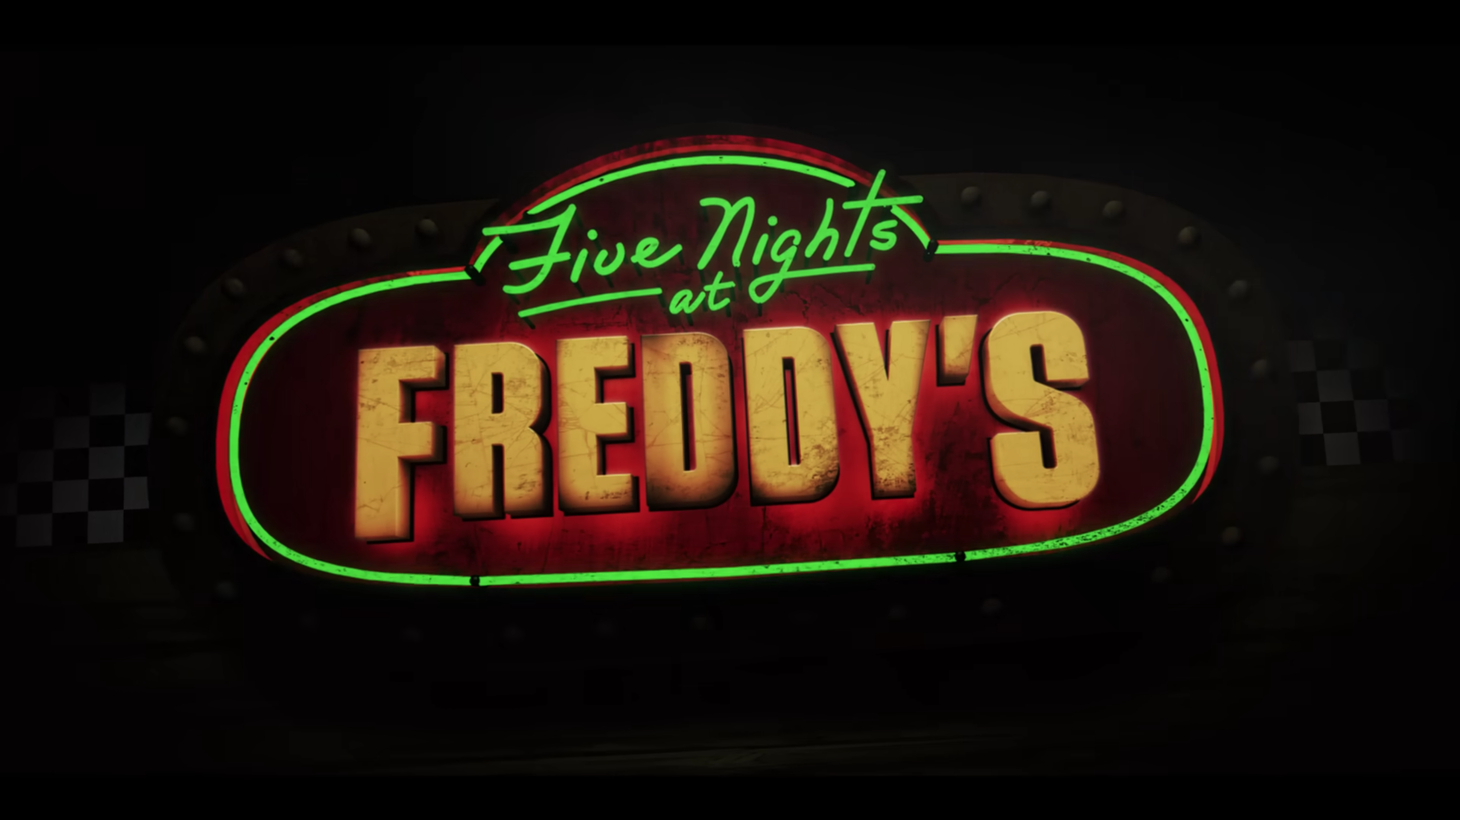 “Five Nights at Freddy's” centers around the night security officer at a Chuck E. Cheese-like pizza chain.